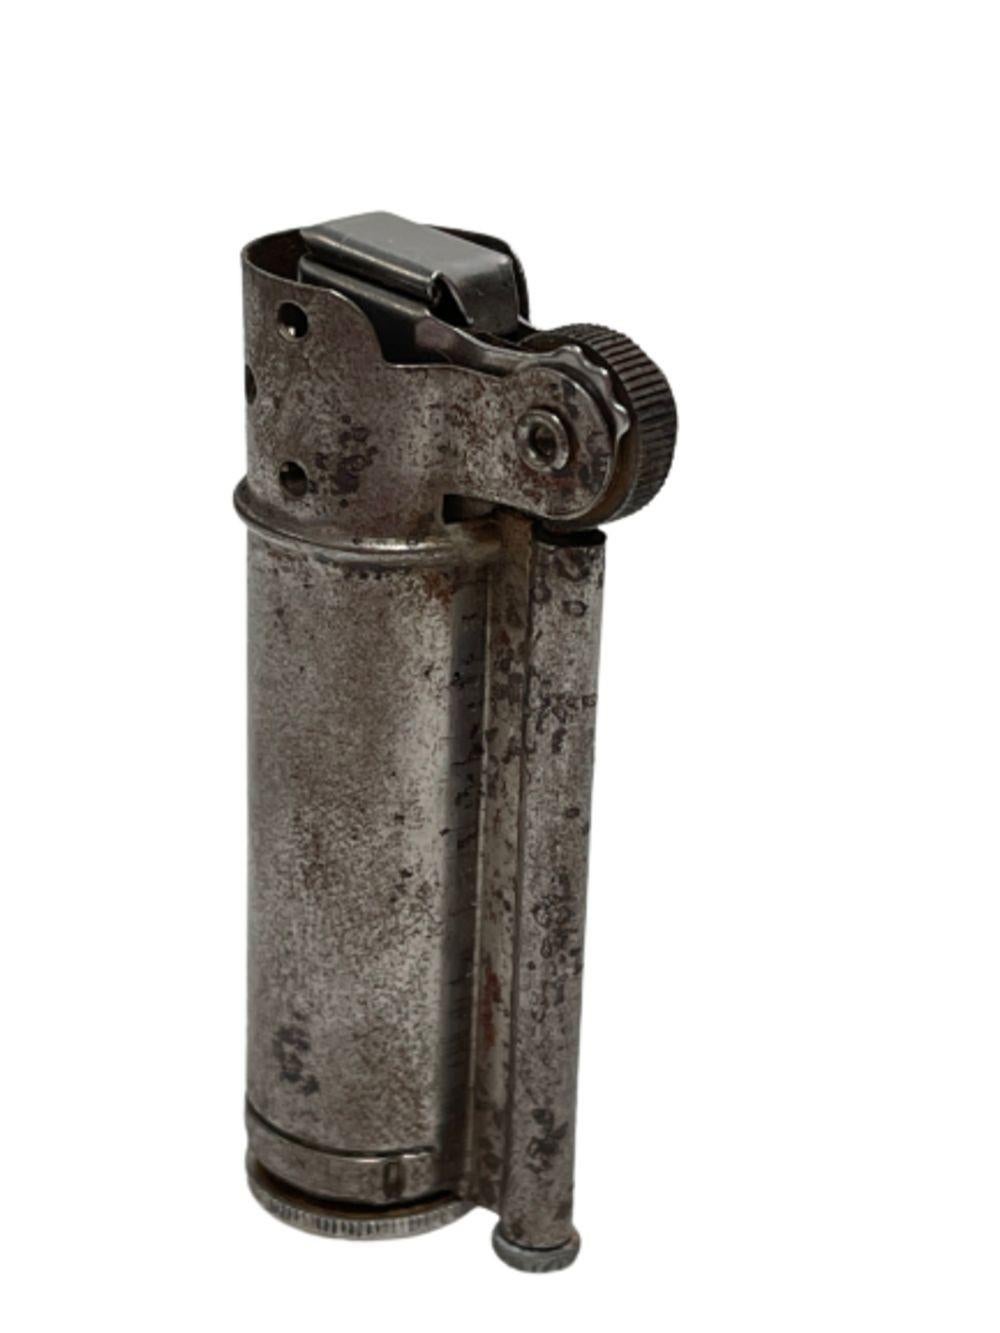 This antique Dunhill Service Lighter, crafted in the United States and originally intended for military use, dates back to 1940. It stands out as one of the rare Dunhill lighters designed for the masses. Constructed from sturdy steel, this Service